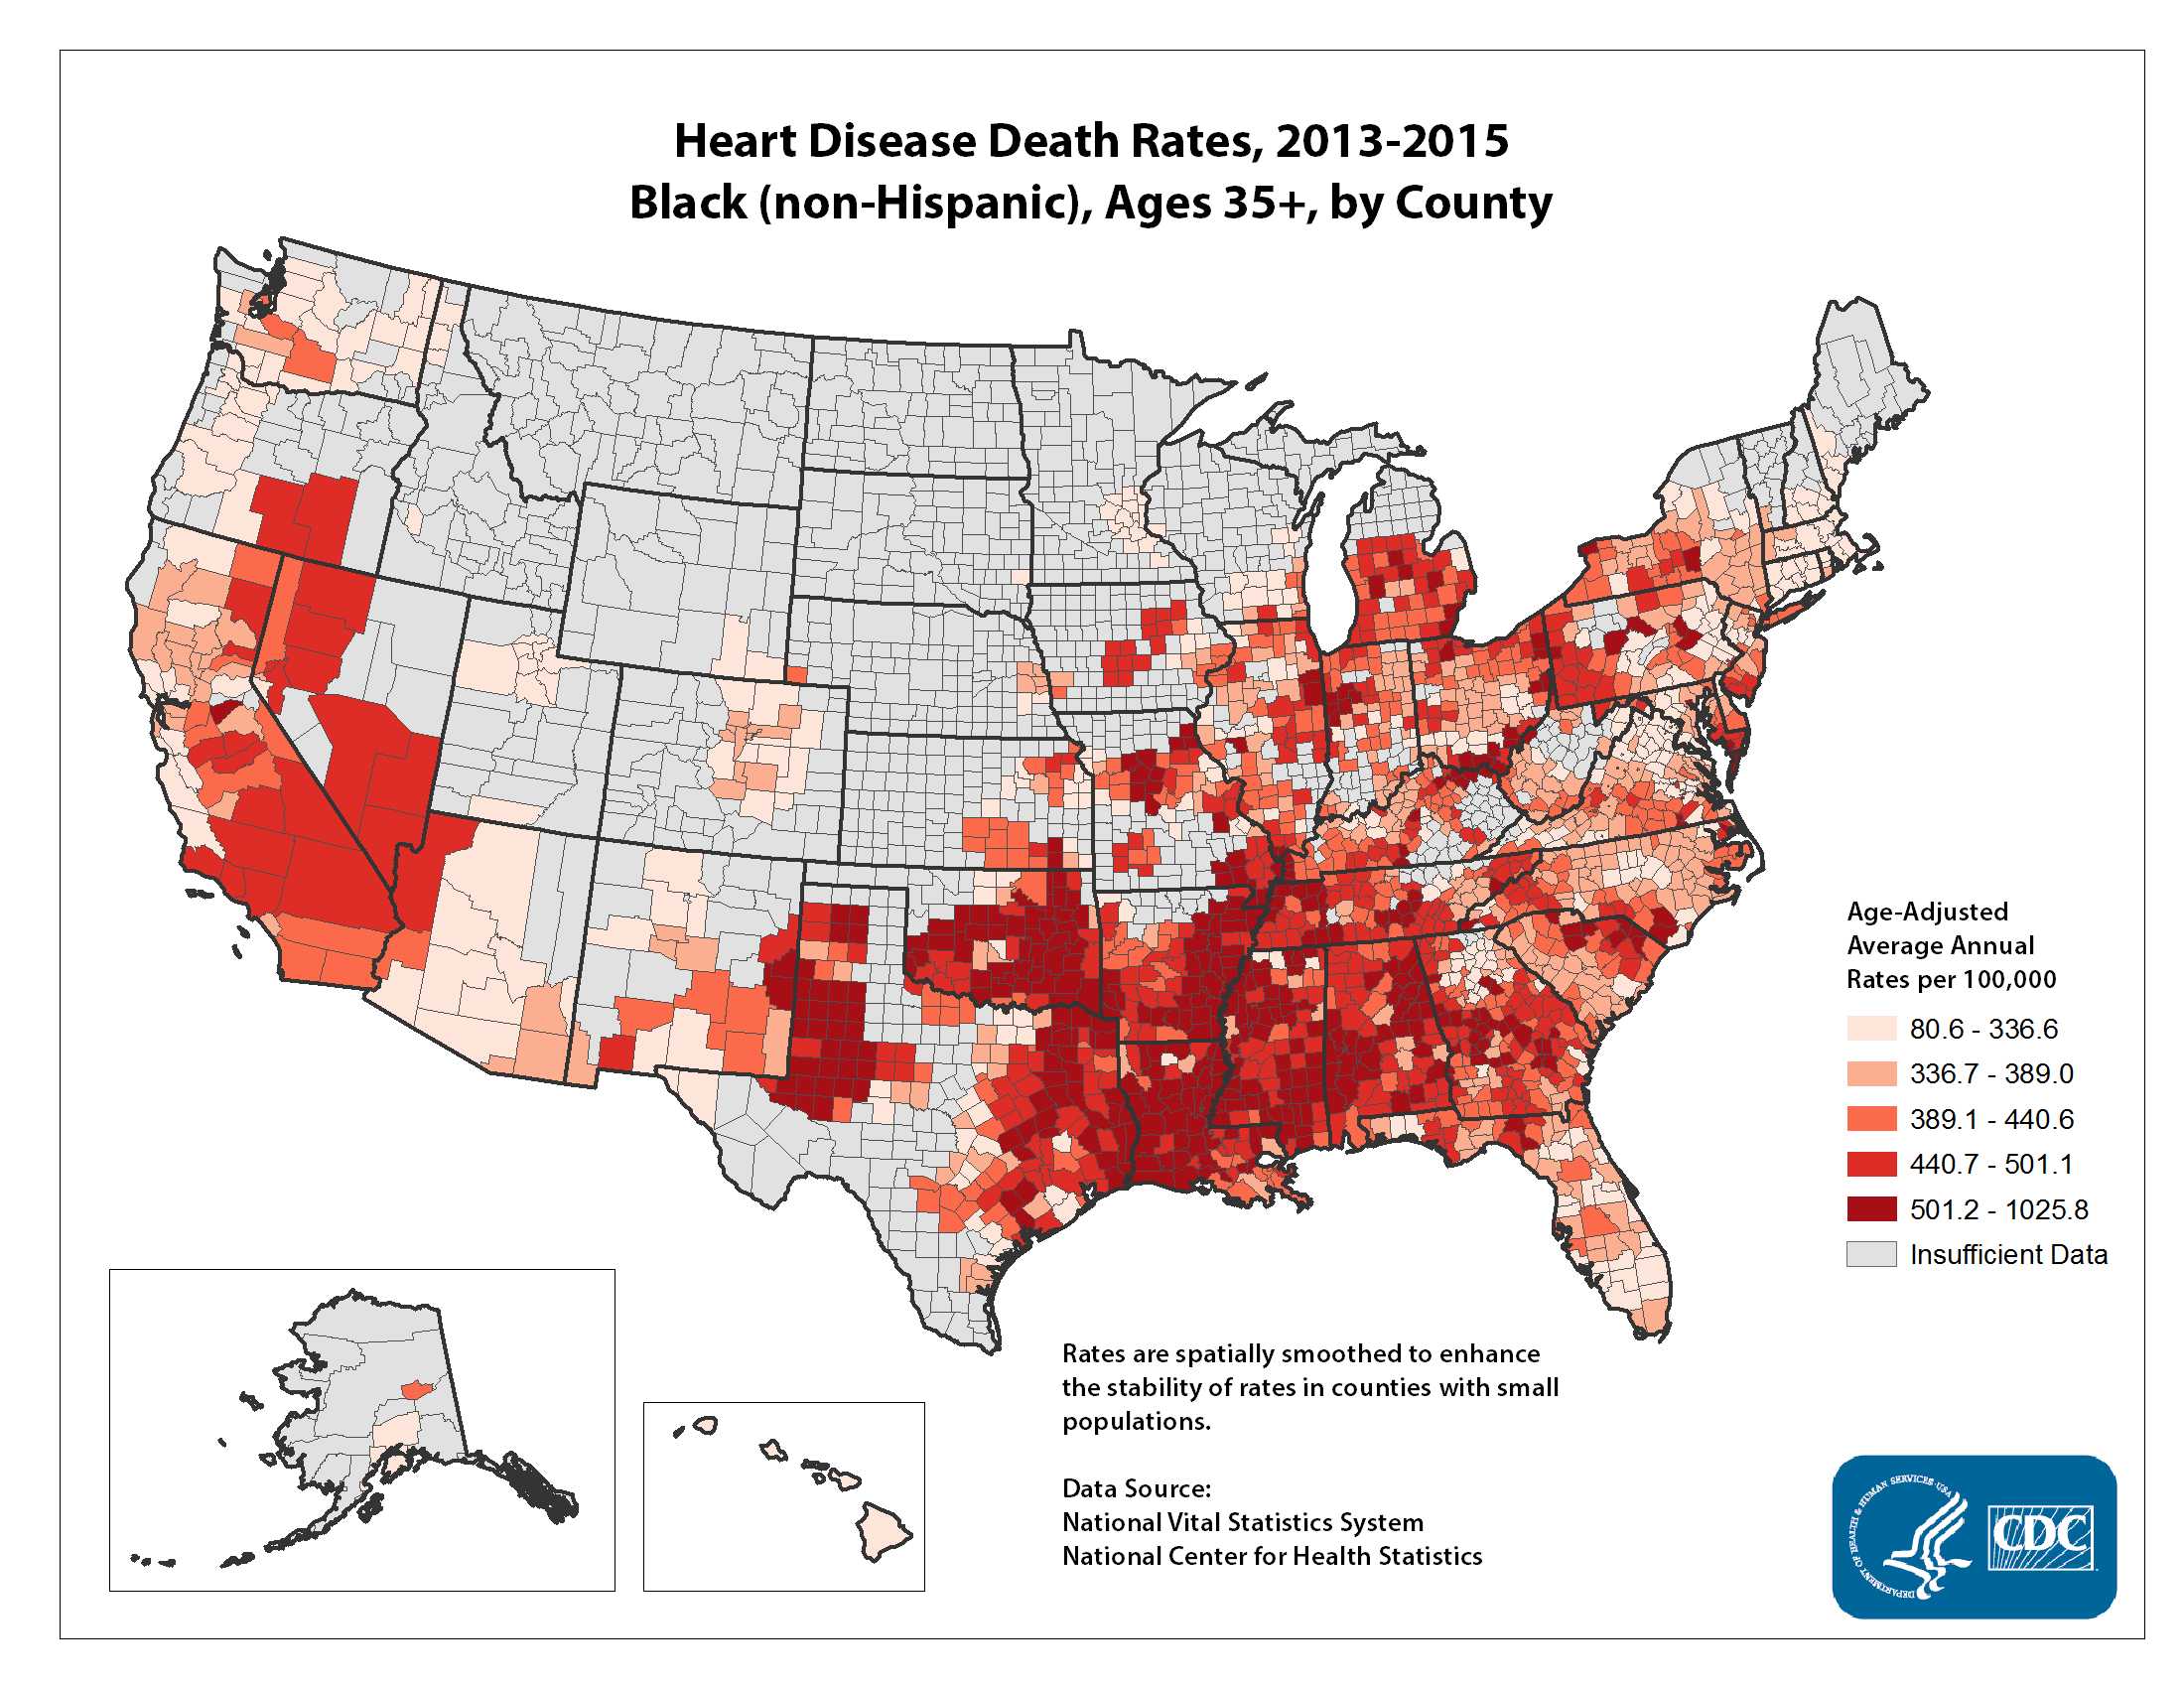 Heart Disease Death Rates for 2012 through 2014 for Blacks Aged 35 Years and Older by County. The map shows that concentrations of counties with the highest heart disease death rates for Blacks - meaning the top quintile - are located primarily in Alabama, Louisiana, Mississippi, and Oklahoma.  Pockets of high-rate counties also were found in parts of Georgia, Arkansas, Michigan, Missouri, and Texas.